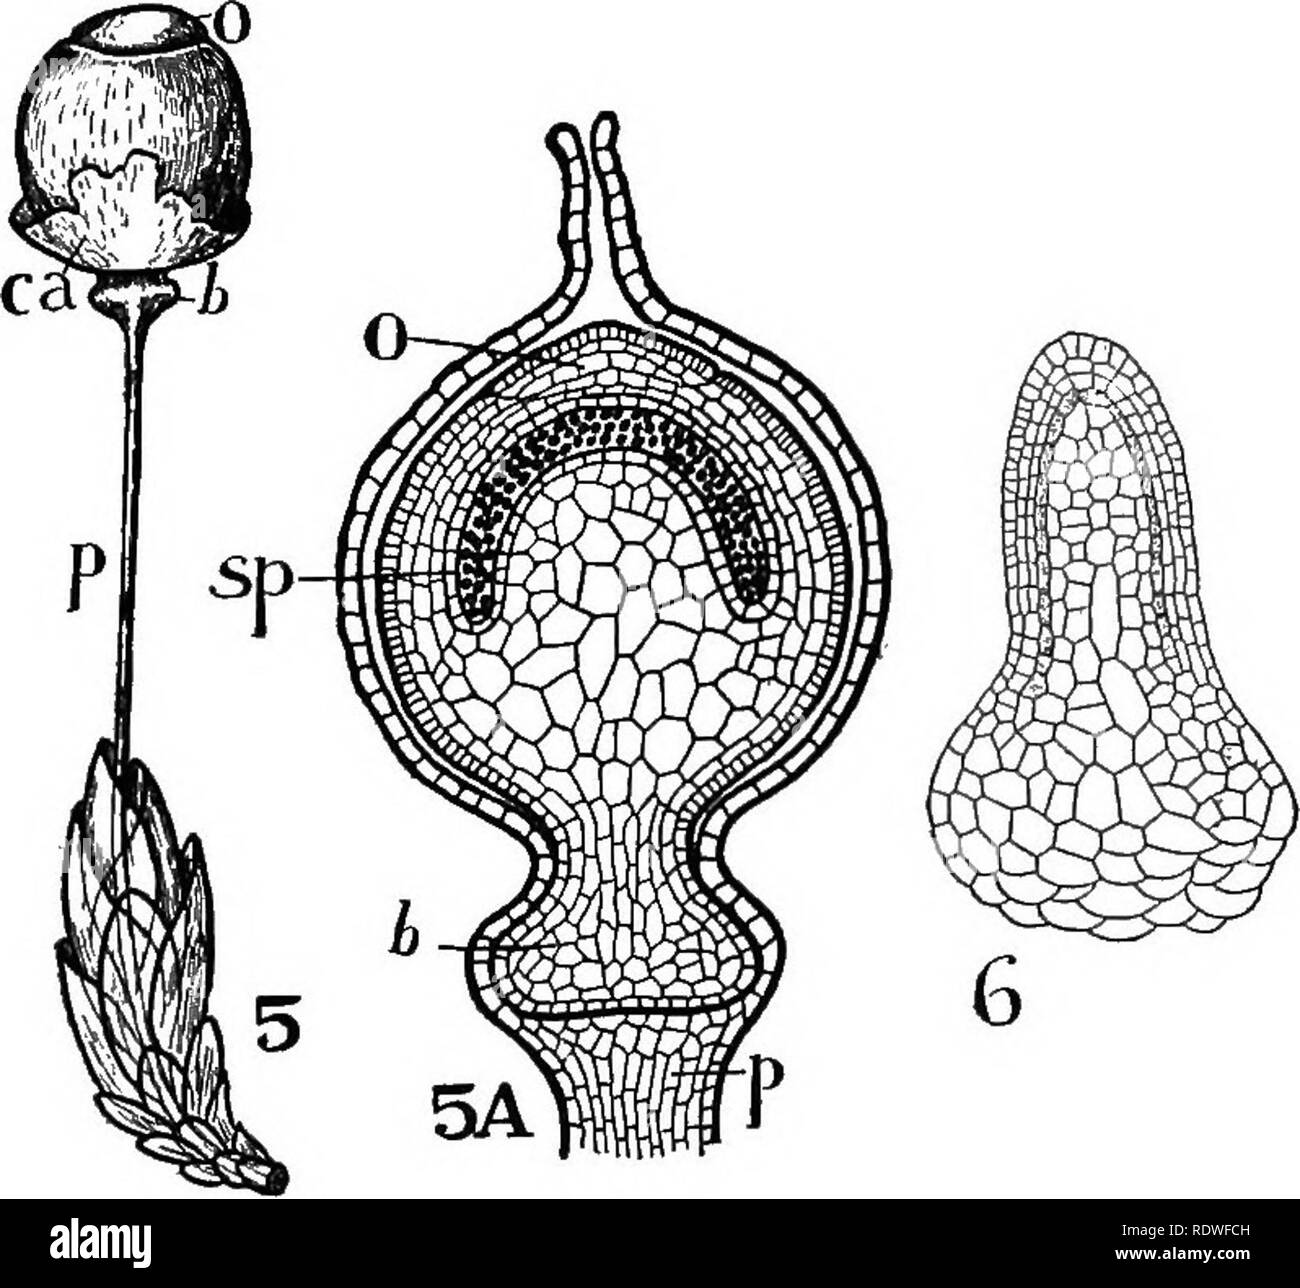 . Nature and development of plants. Botany. DEVELOPMENT OF PLANTS 299 leafy hepatics, the former organs appearing as stalked bodies in the axils of the leaves on short cone-like branches and the archegonia originate on the tips of short branches. The gameto- spore germinates very much as in Anthoceros (Fig. 203, 6). It does not, however, have as prolonged a growth, and at ma-. FiG. 203. The sporophyte of Sphagnum: 6, the young sporophyte sepa- rated from the archegonium with essentially the same differentiation of parts as noted in Anthoceros, Fig. 199. 5^, diagram of a later development of th Stock Photo